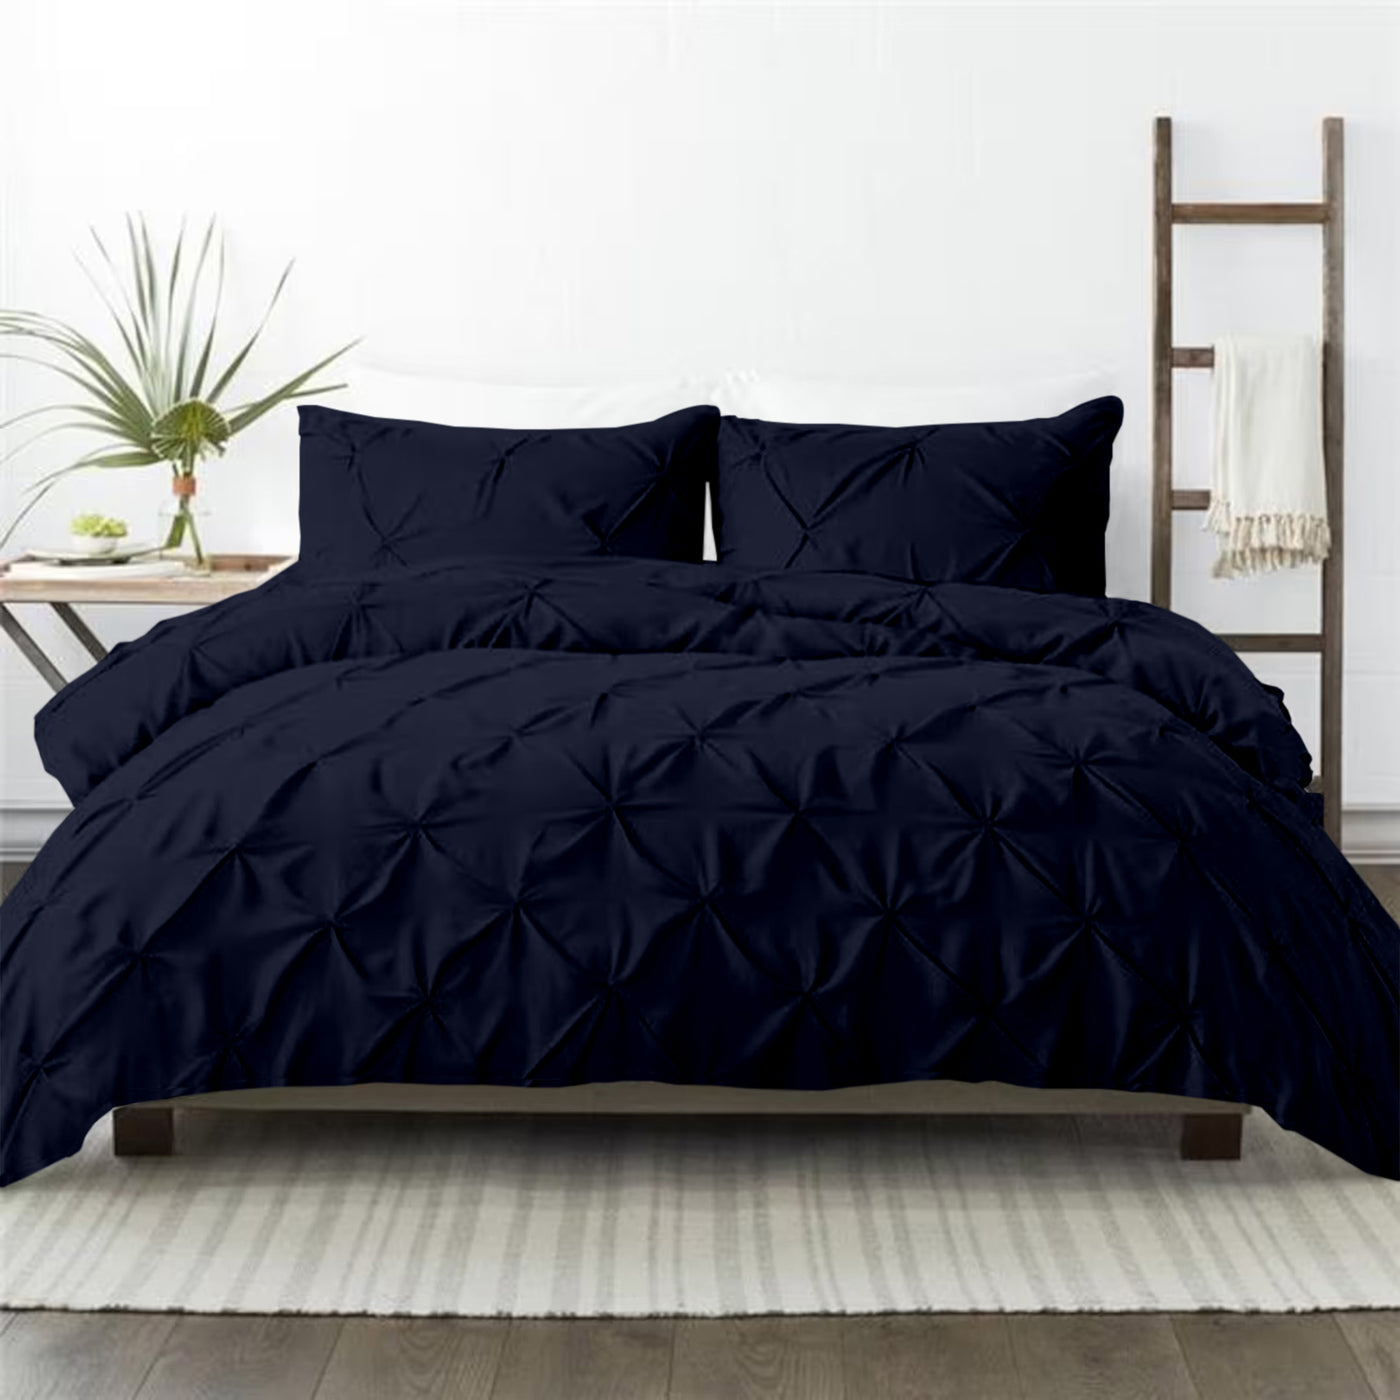 Pinch Pleated Down Alternative Quilt 300 TC Egyptian Cotton Exterior With 2 Pillow Covers - Navy Blue